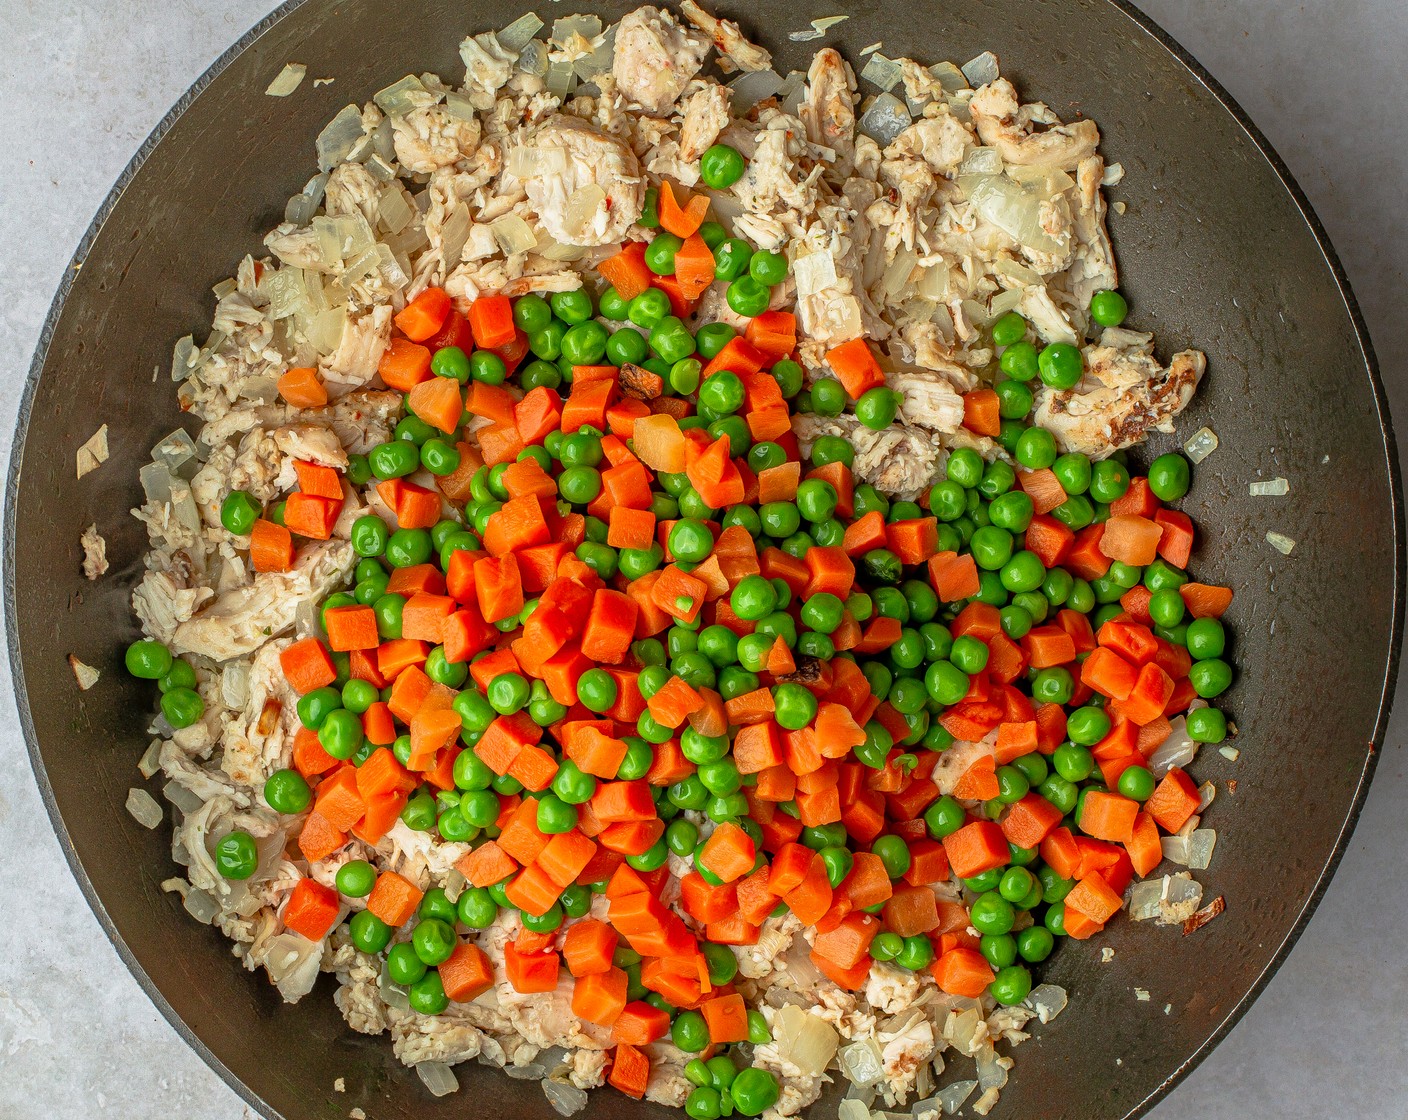 step 2 Fold in the Rotisserie Chicken (1 lb), Frozen Peas and Carrots (1 1/2 cups) for 2 minutes. Vegetables should be defrosted before proceeding.